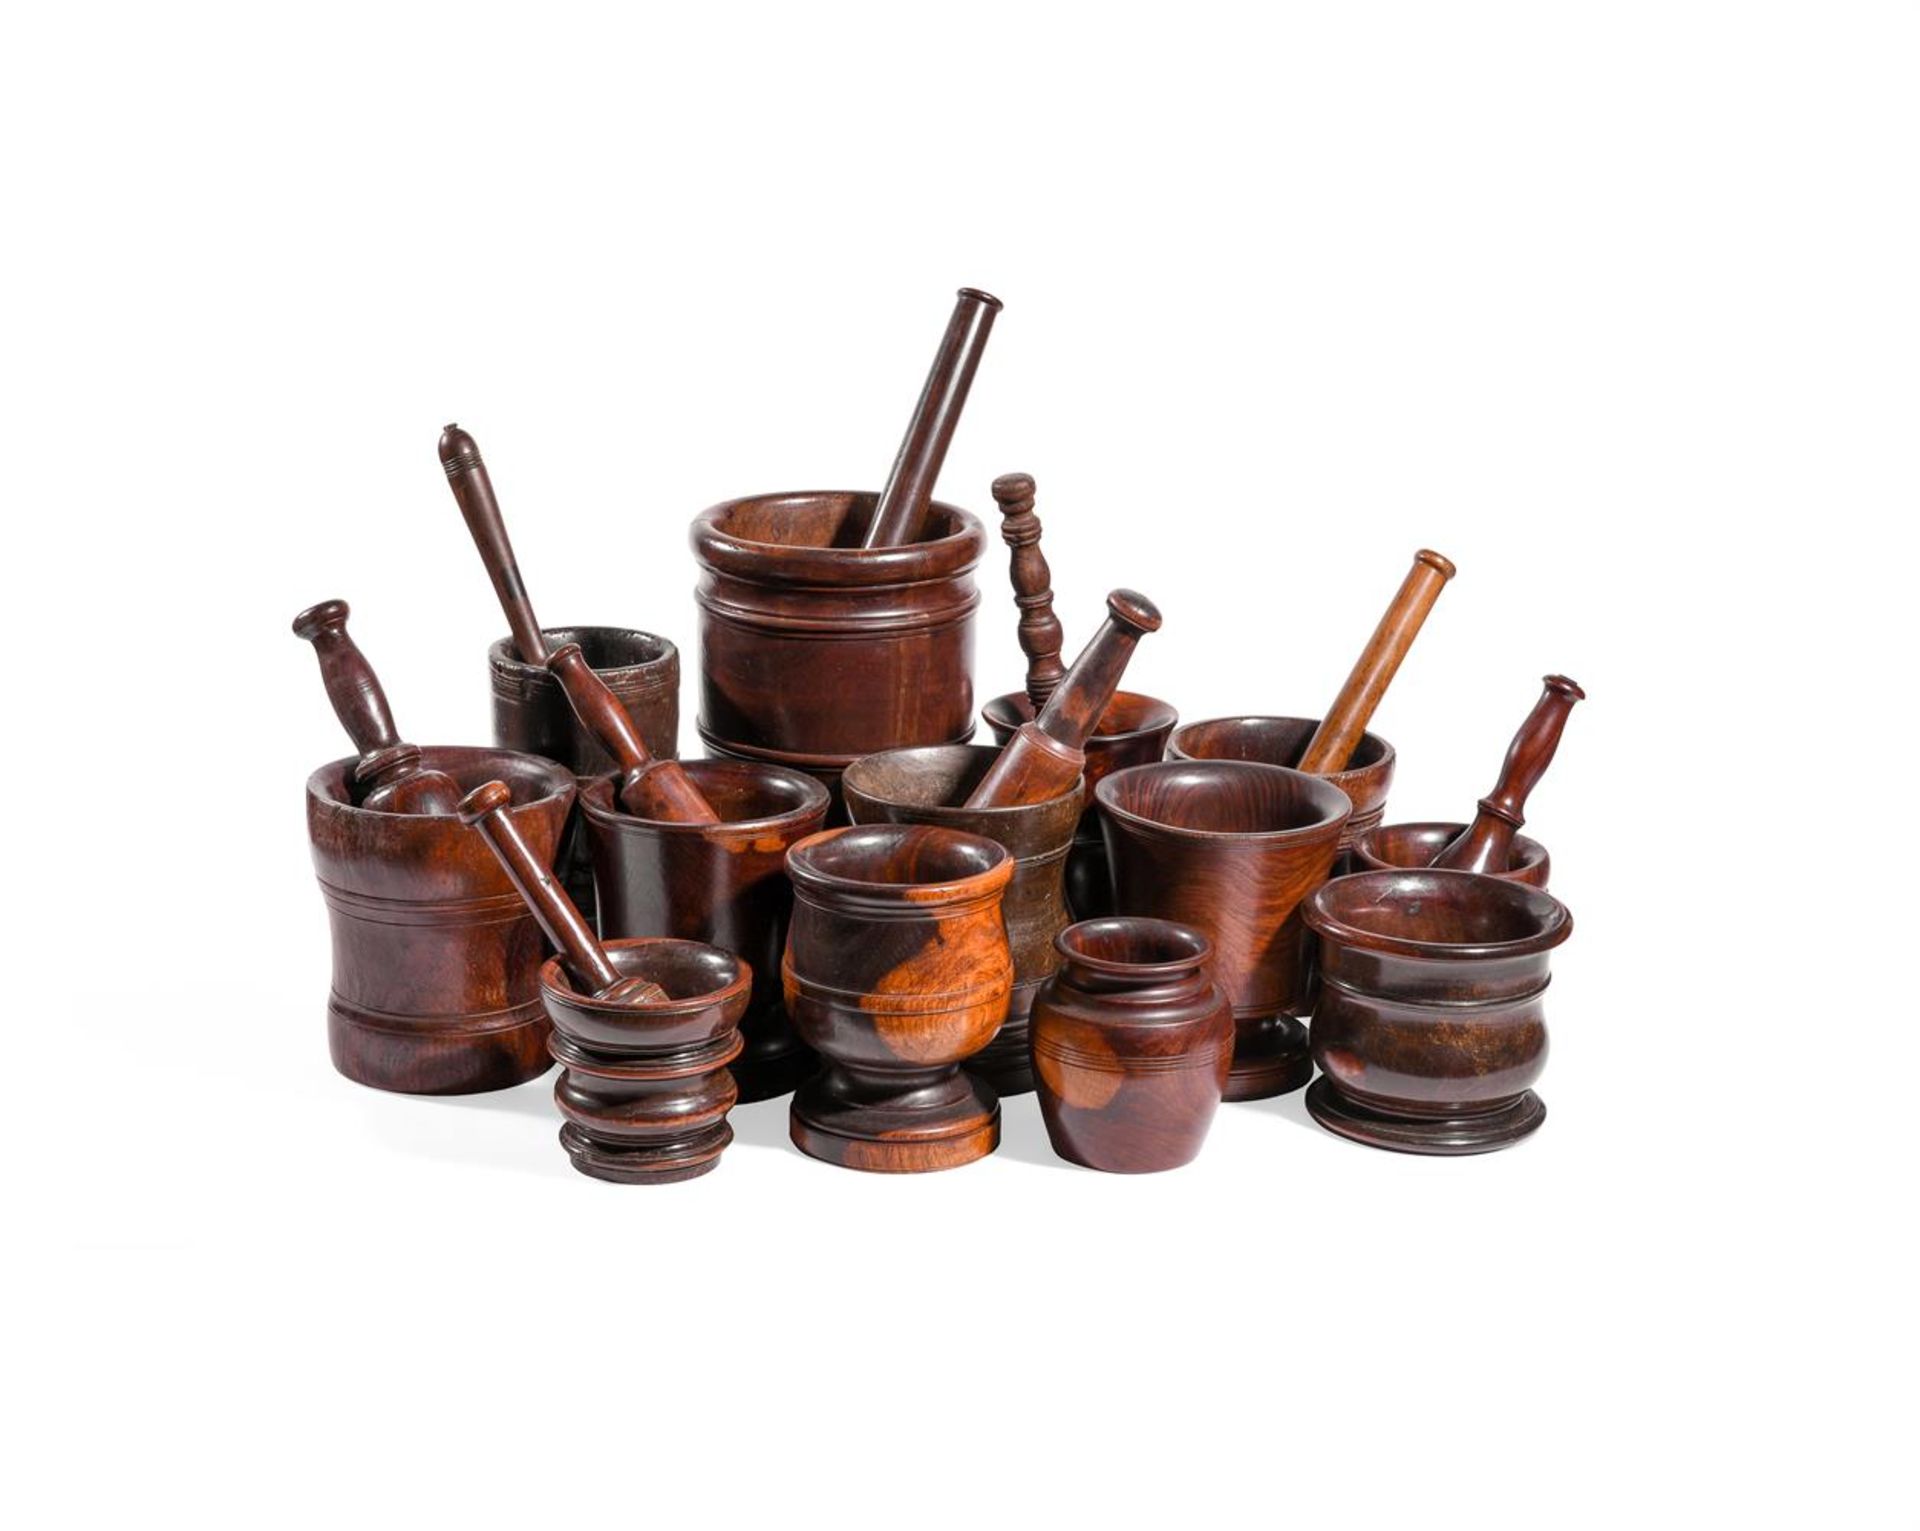 A GOOD COLLECTION OF ENGLISH AND DUTCH LIGNUM VITAE MORTARS AND PESTLES, 18TH/19TH CENTURY